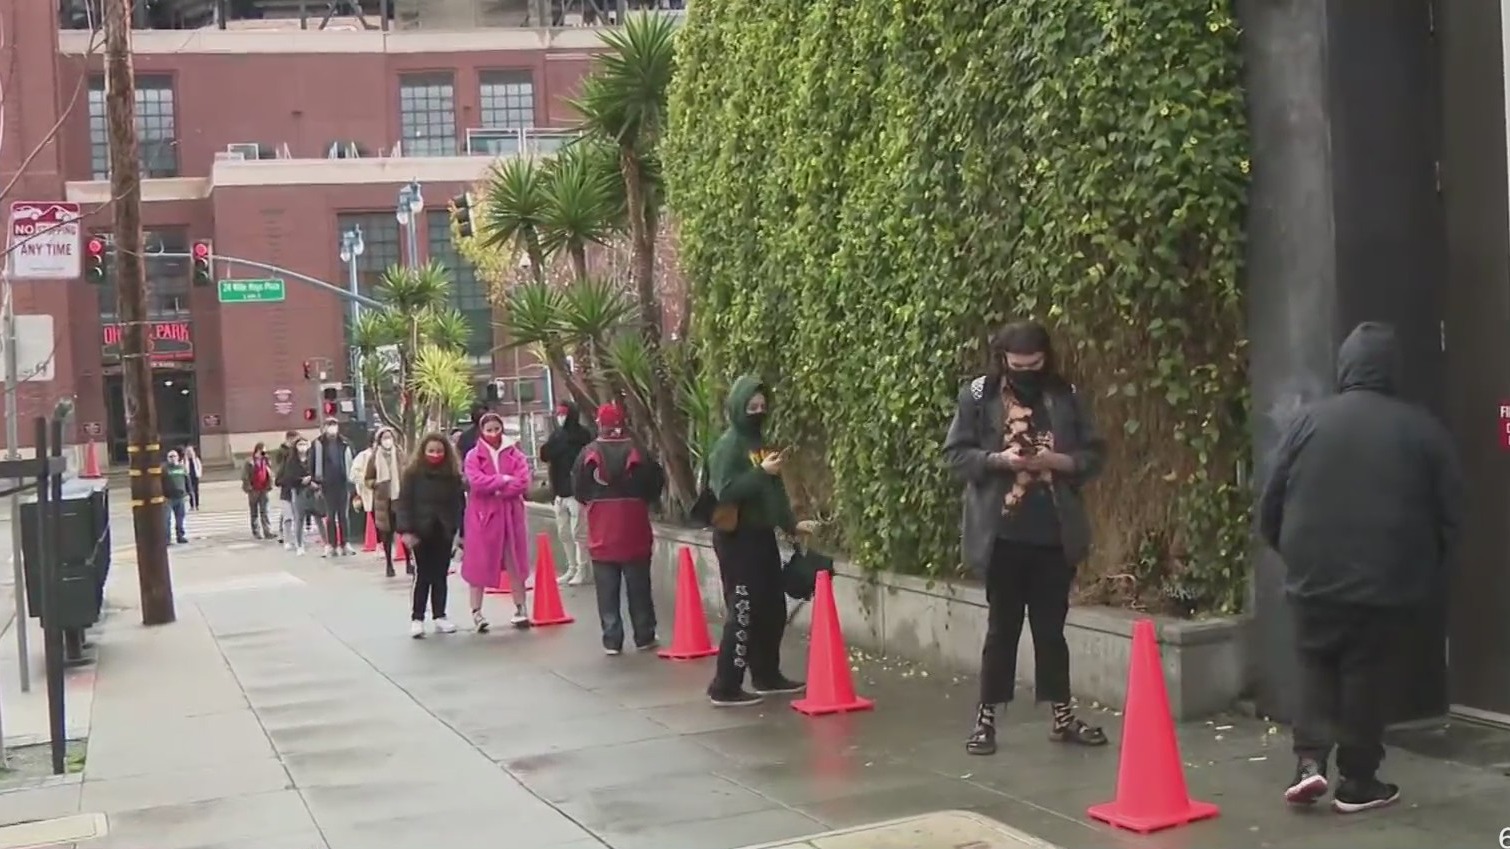 The line outside a COVID-19 testing site in San Francisco during the omicron variant surge, January 4, 2022. (CBS)